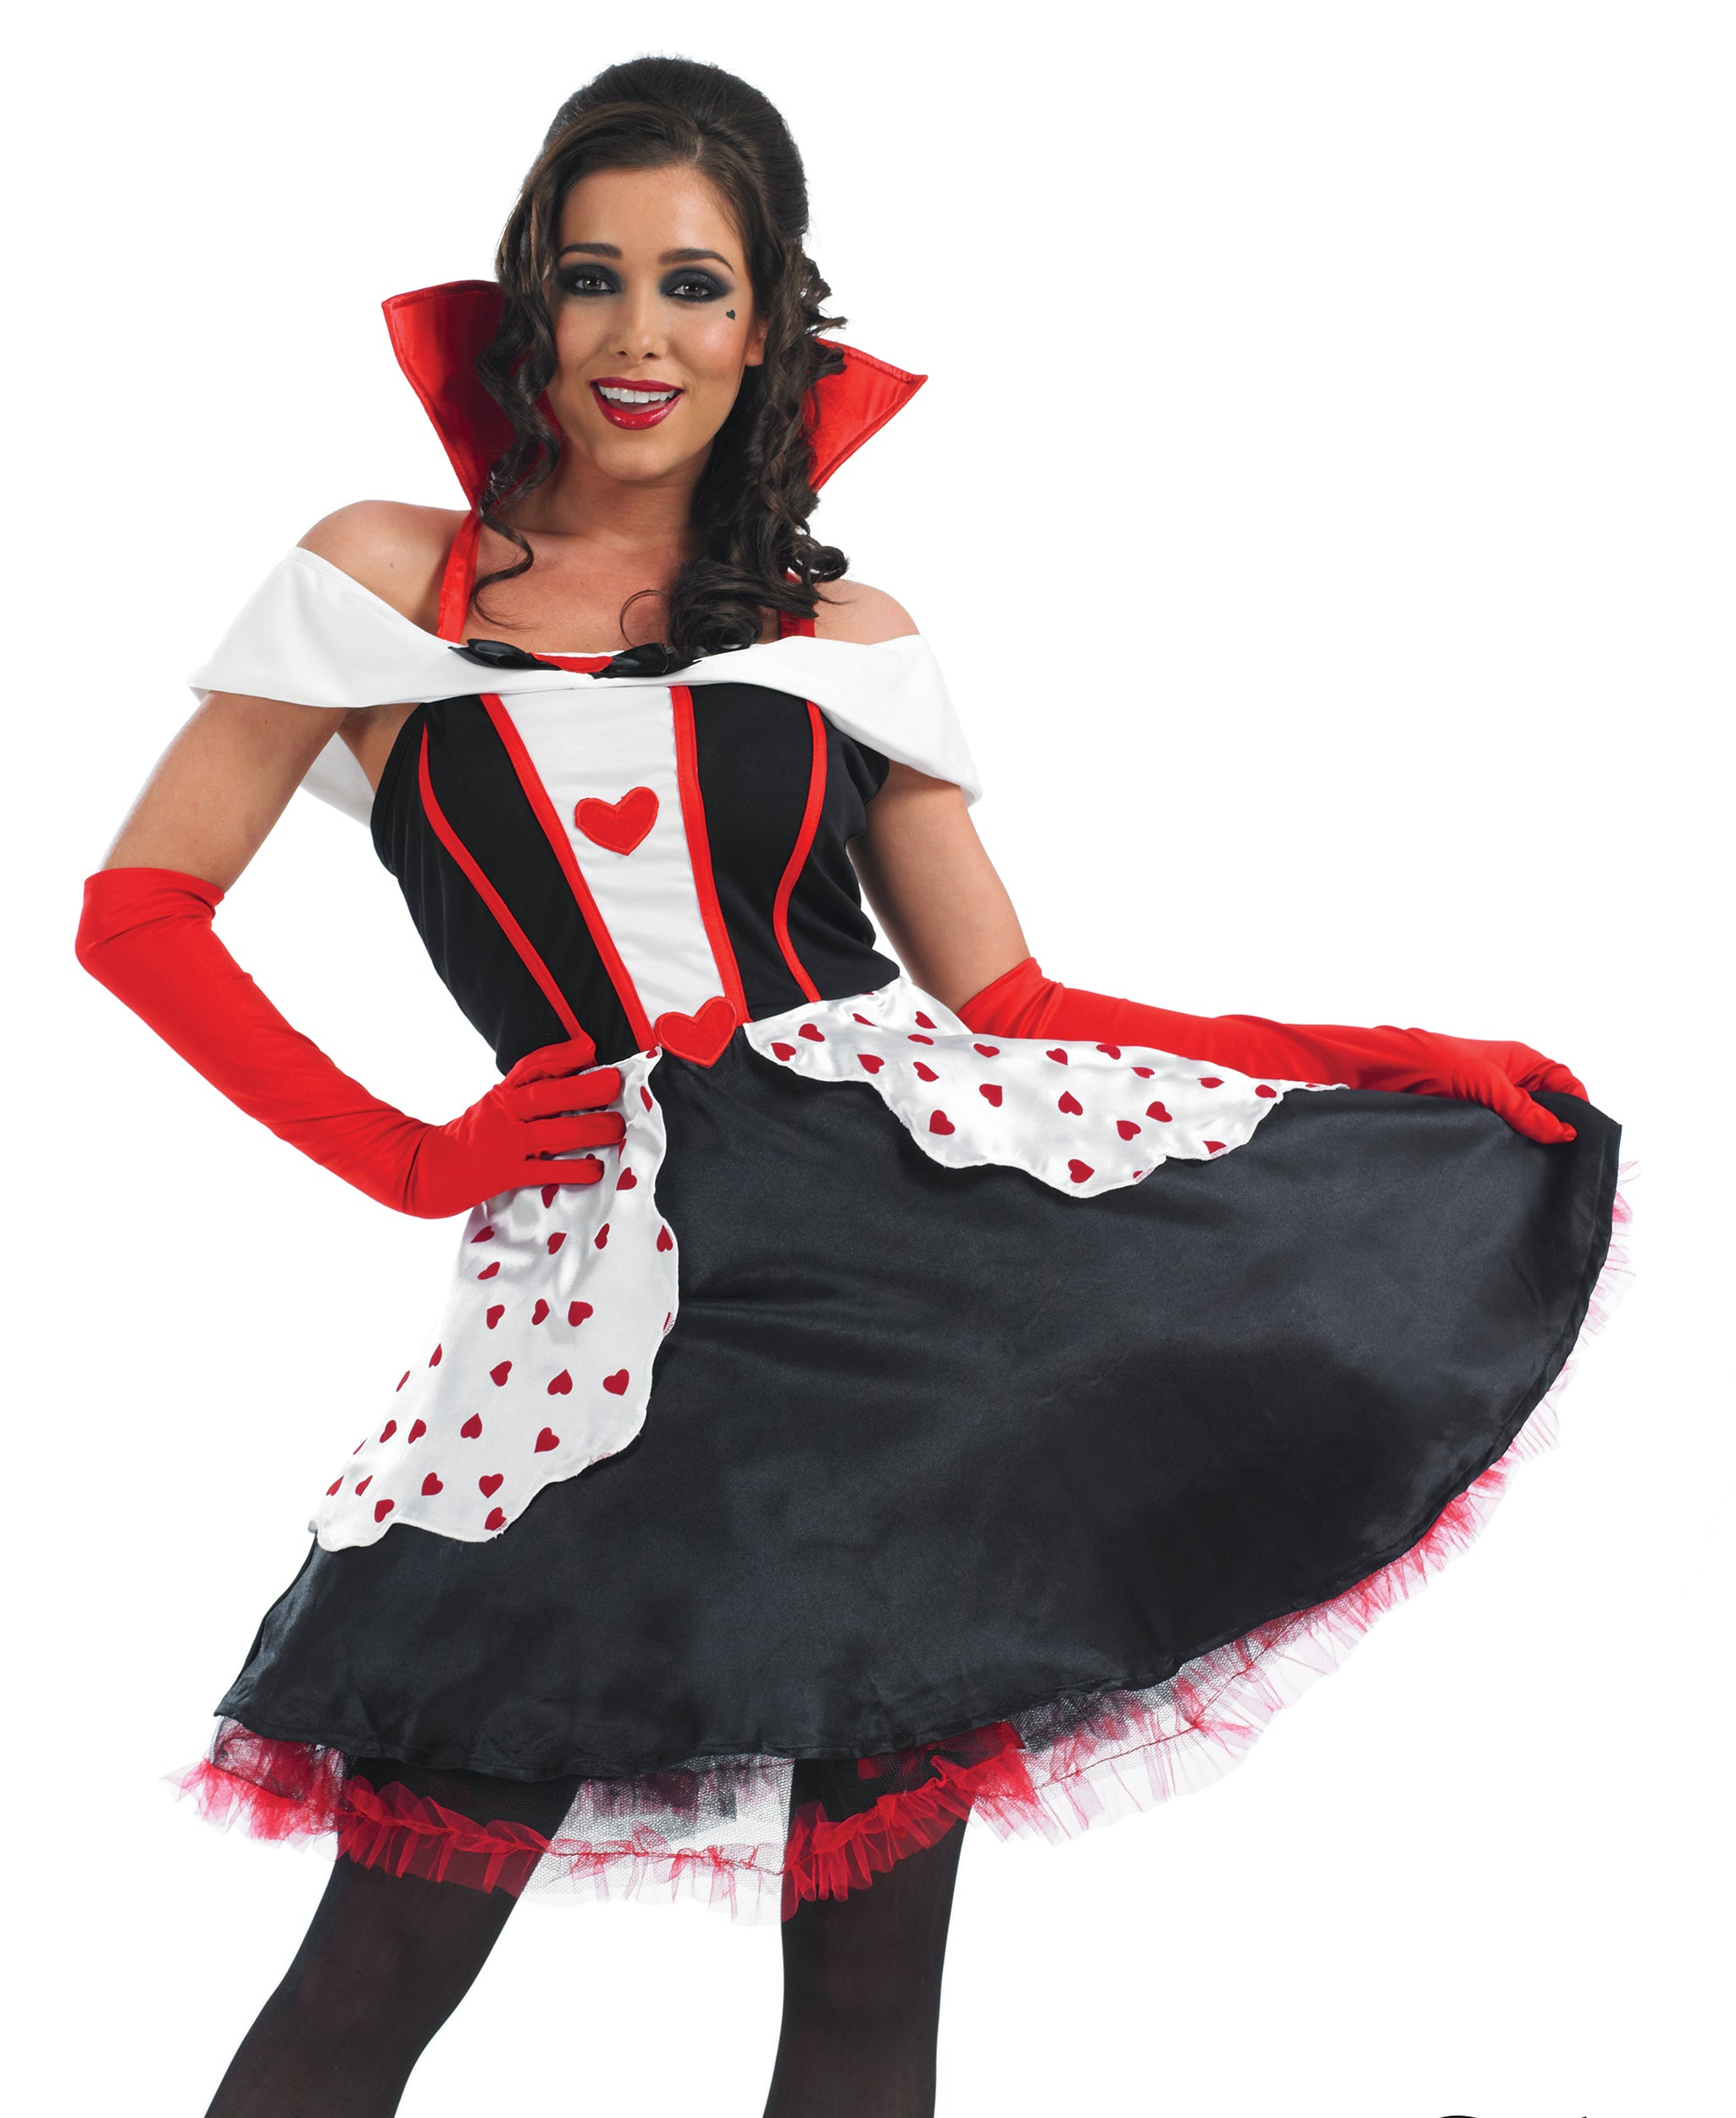 Queen of Hearts outfit Long Skirt